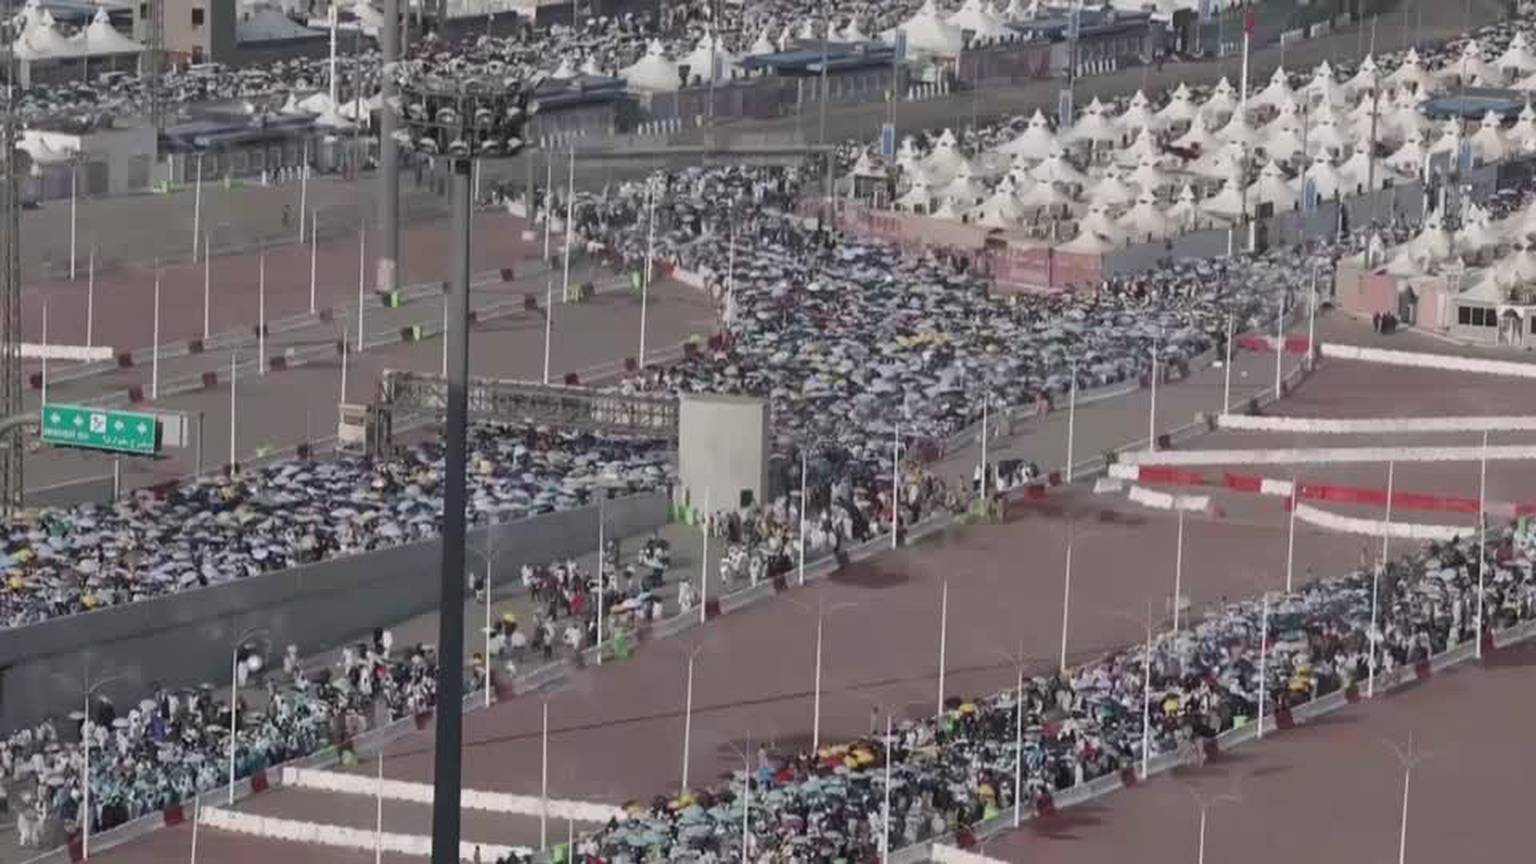 Video: Deadly heat during Hajj pilgrimage expected to worsen in coming years [Video]